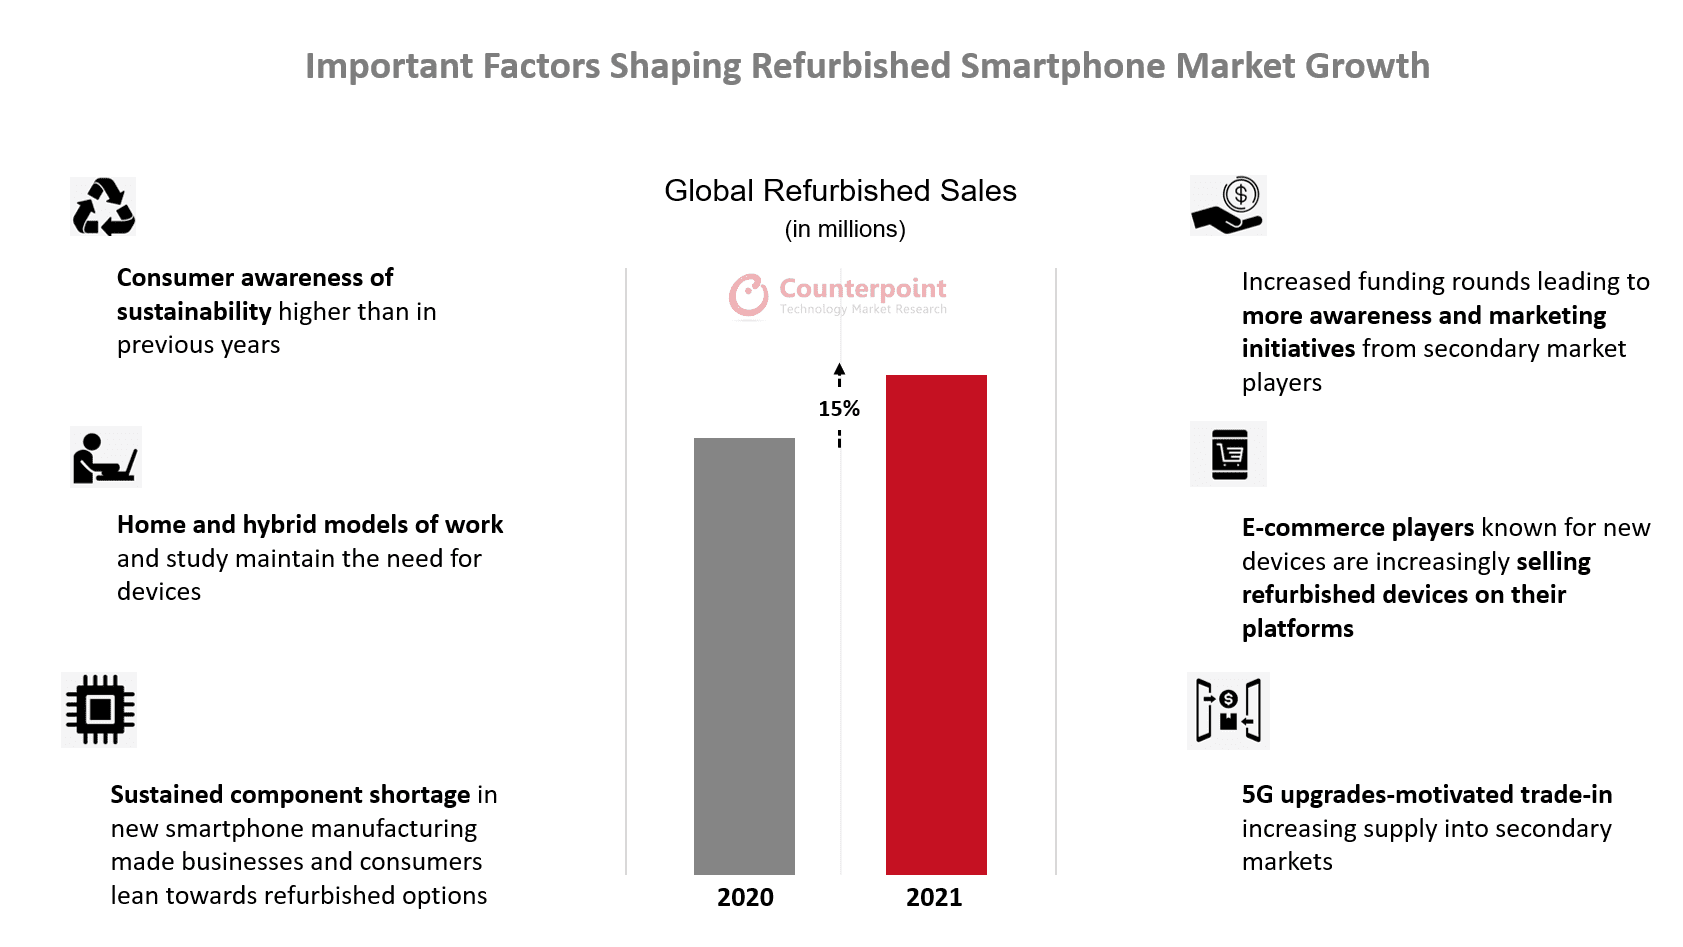 Concerns about affordability  as global second-hand smartphone market grew by 15% in 2021